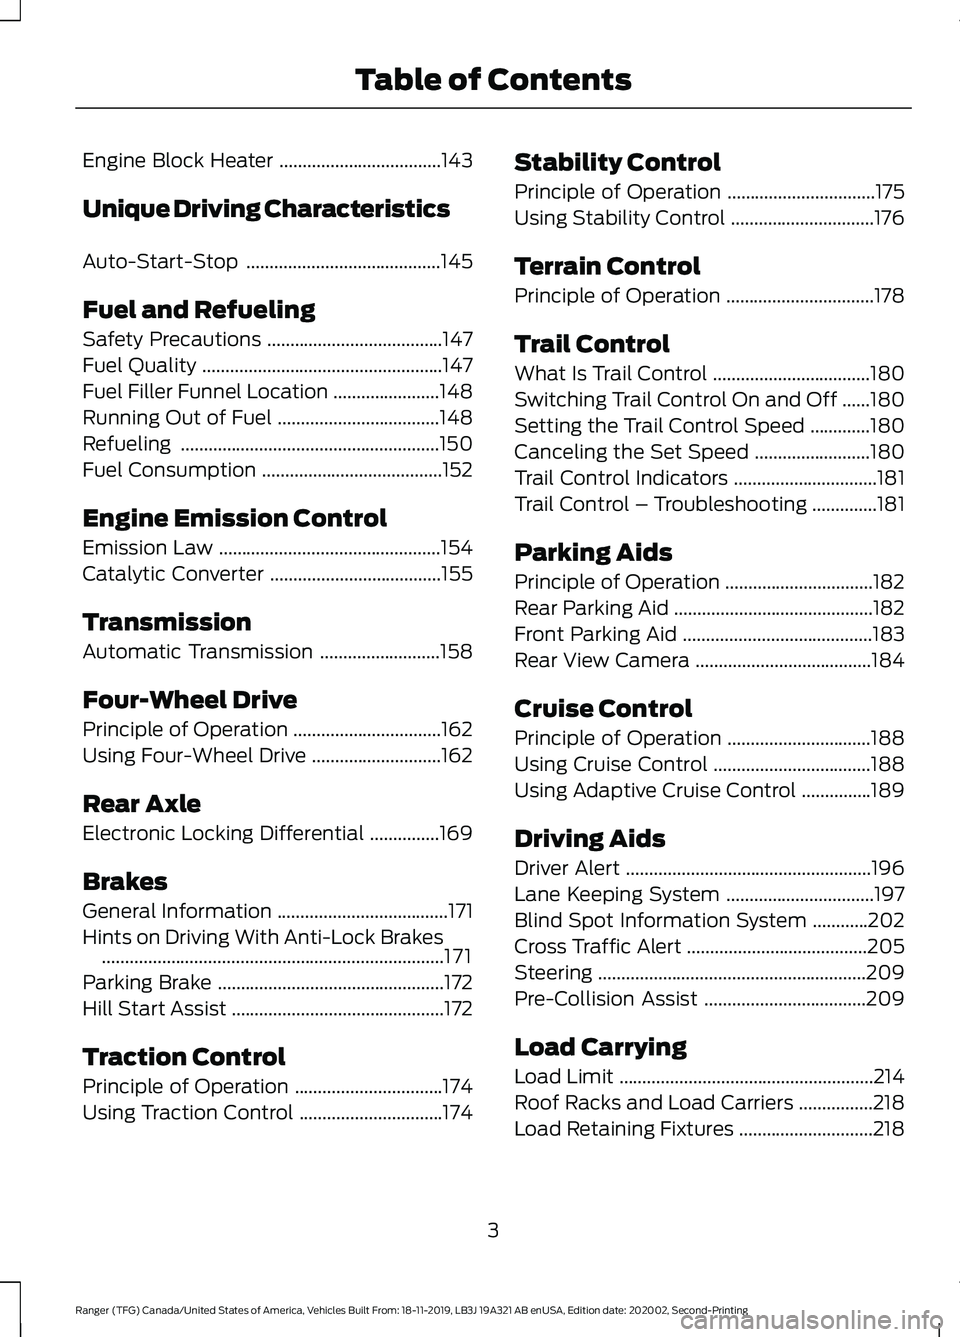 FORD RANGER 2020  Owners Manual Engine Block Heater
...................................143
Unique Driving Characteristics
Auto-Start-Stop ..........................................
145
Fuel and Refueling
Safety Precautions .........